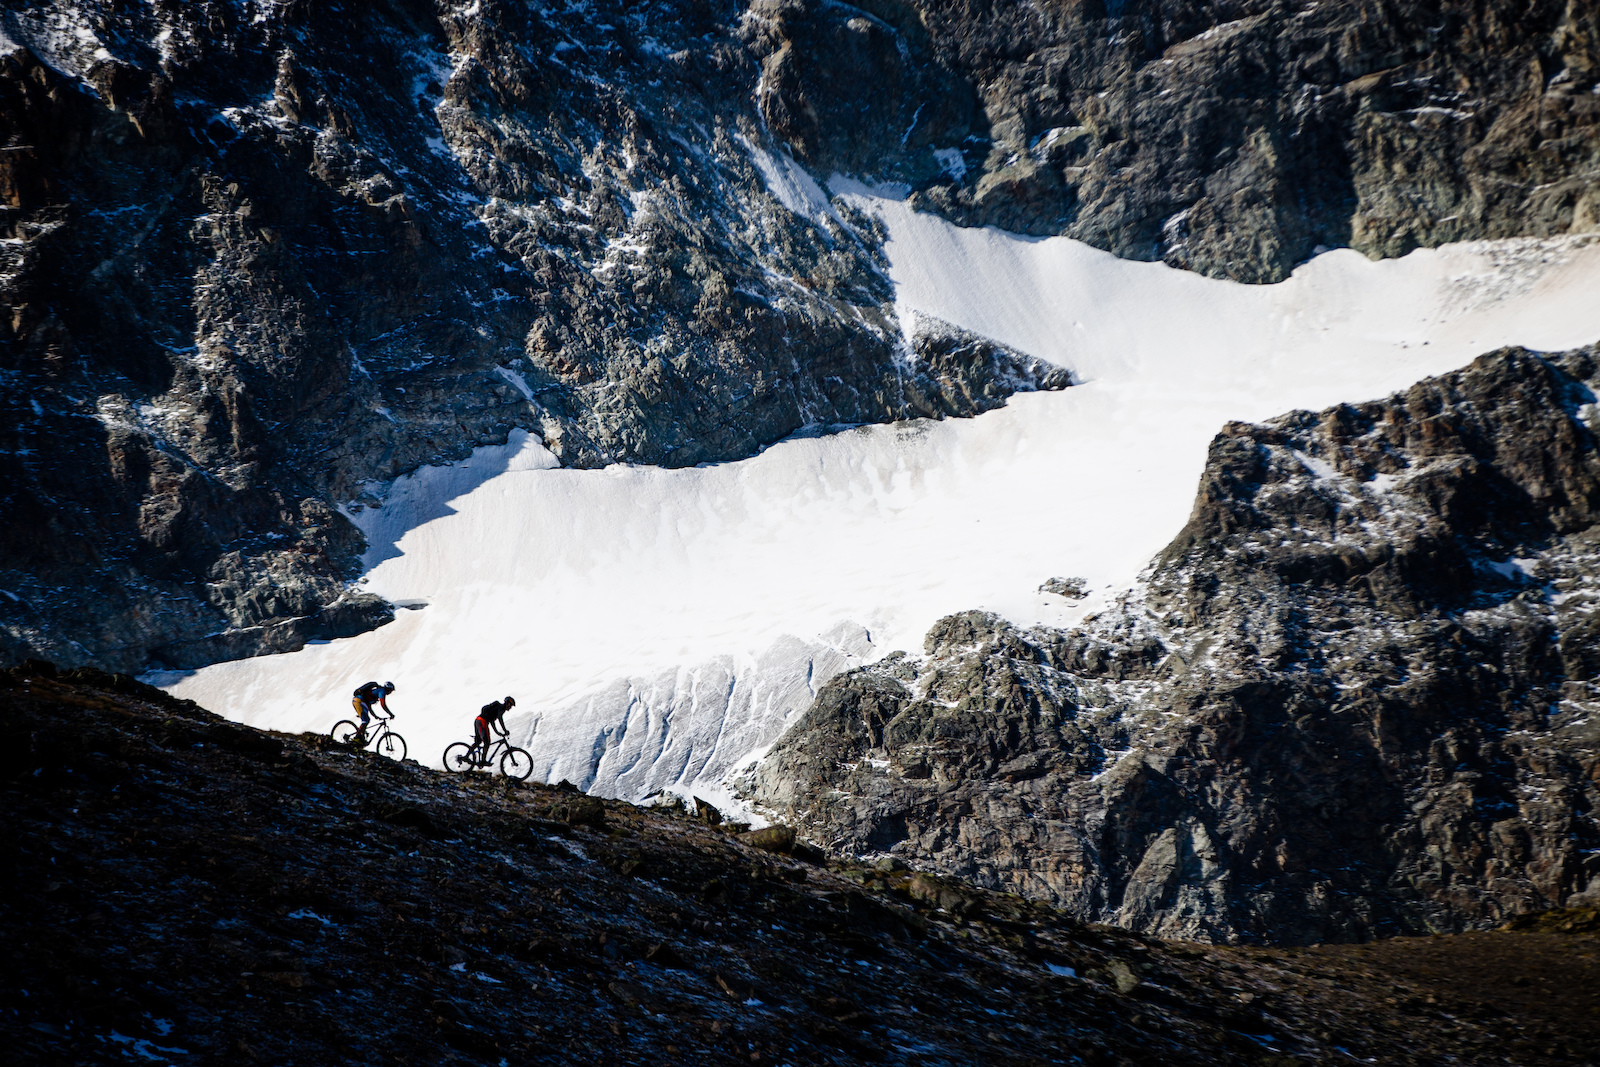 Yohann and Tobi making their way down from Piz Nair. This trail is surrounded from epic views, from top to bottom